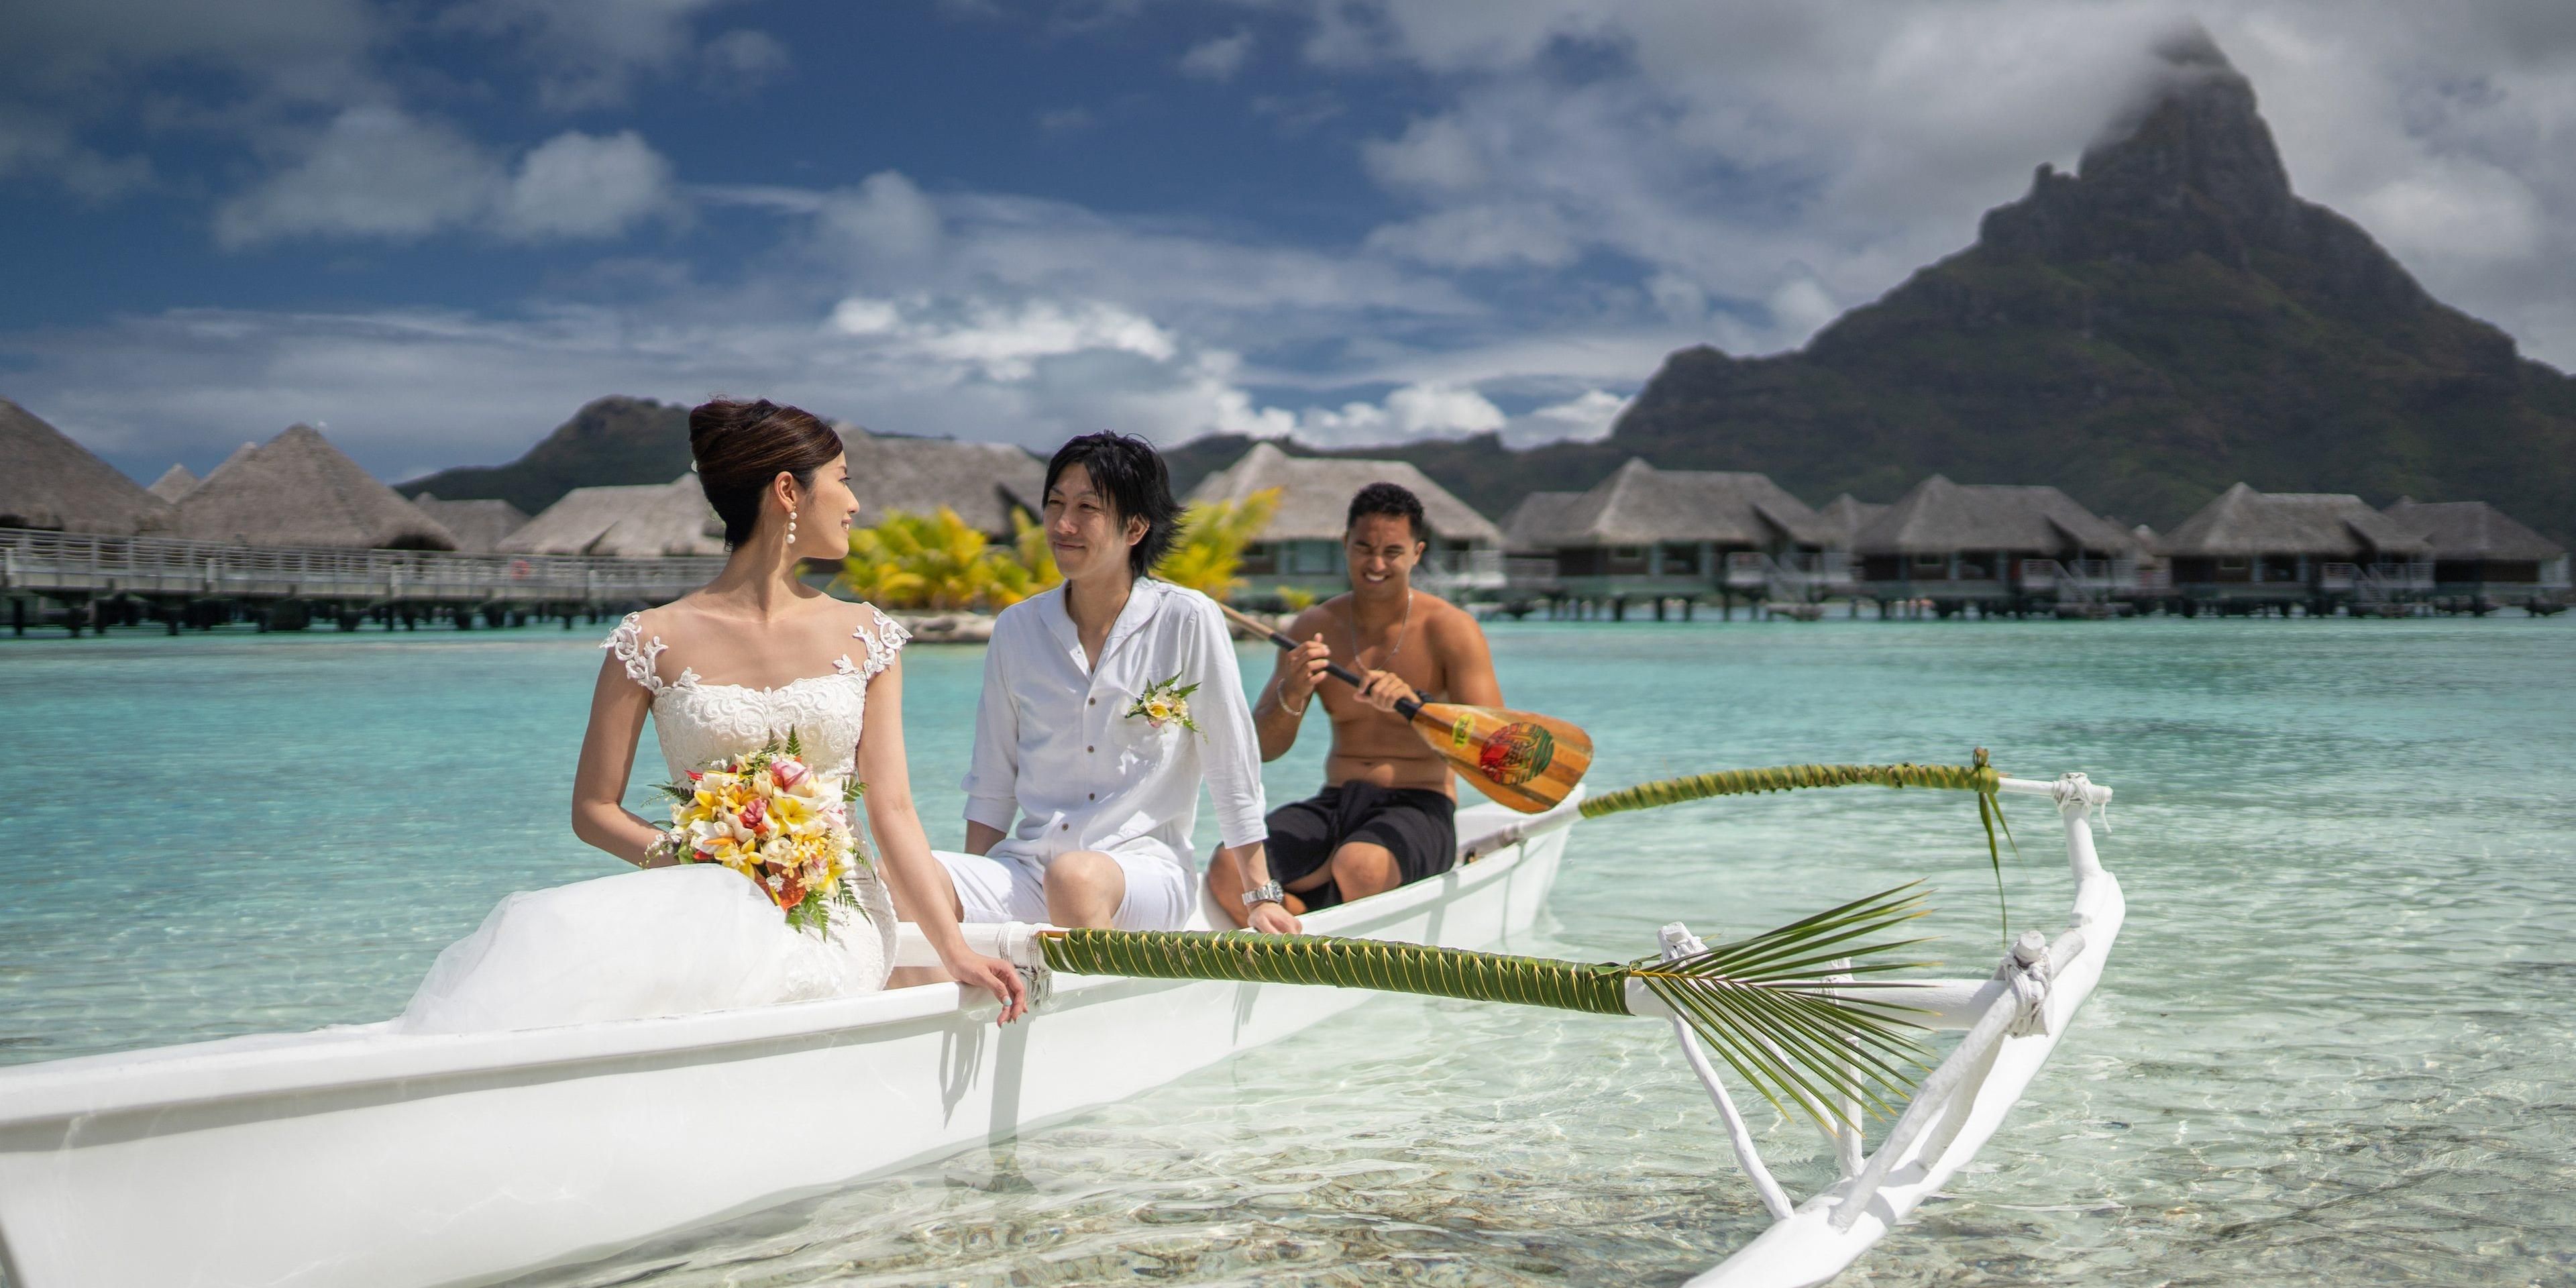 Whether you are in French Polynesia celebrating your union, renewing your vows or savoring a romantic escape, our concierge team at the InterContinental® Bora Bora Resort & Thalasso Spa happily provides thoughtful and distinctive service.